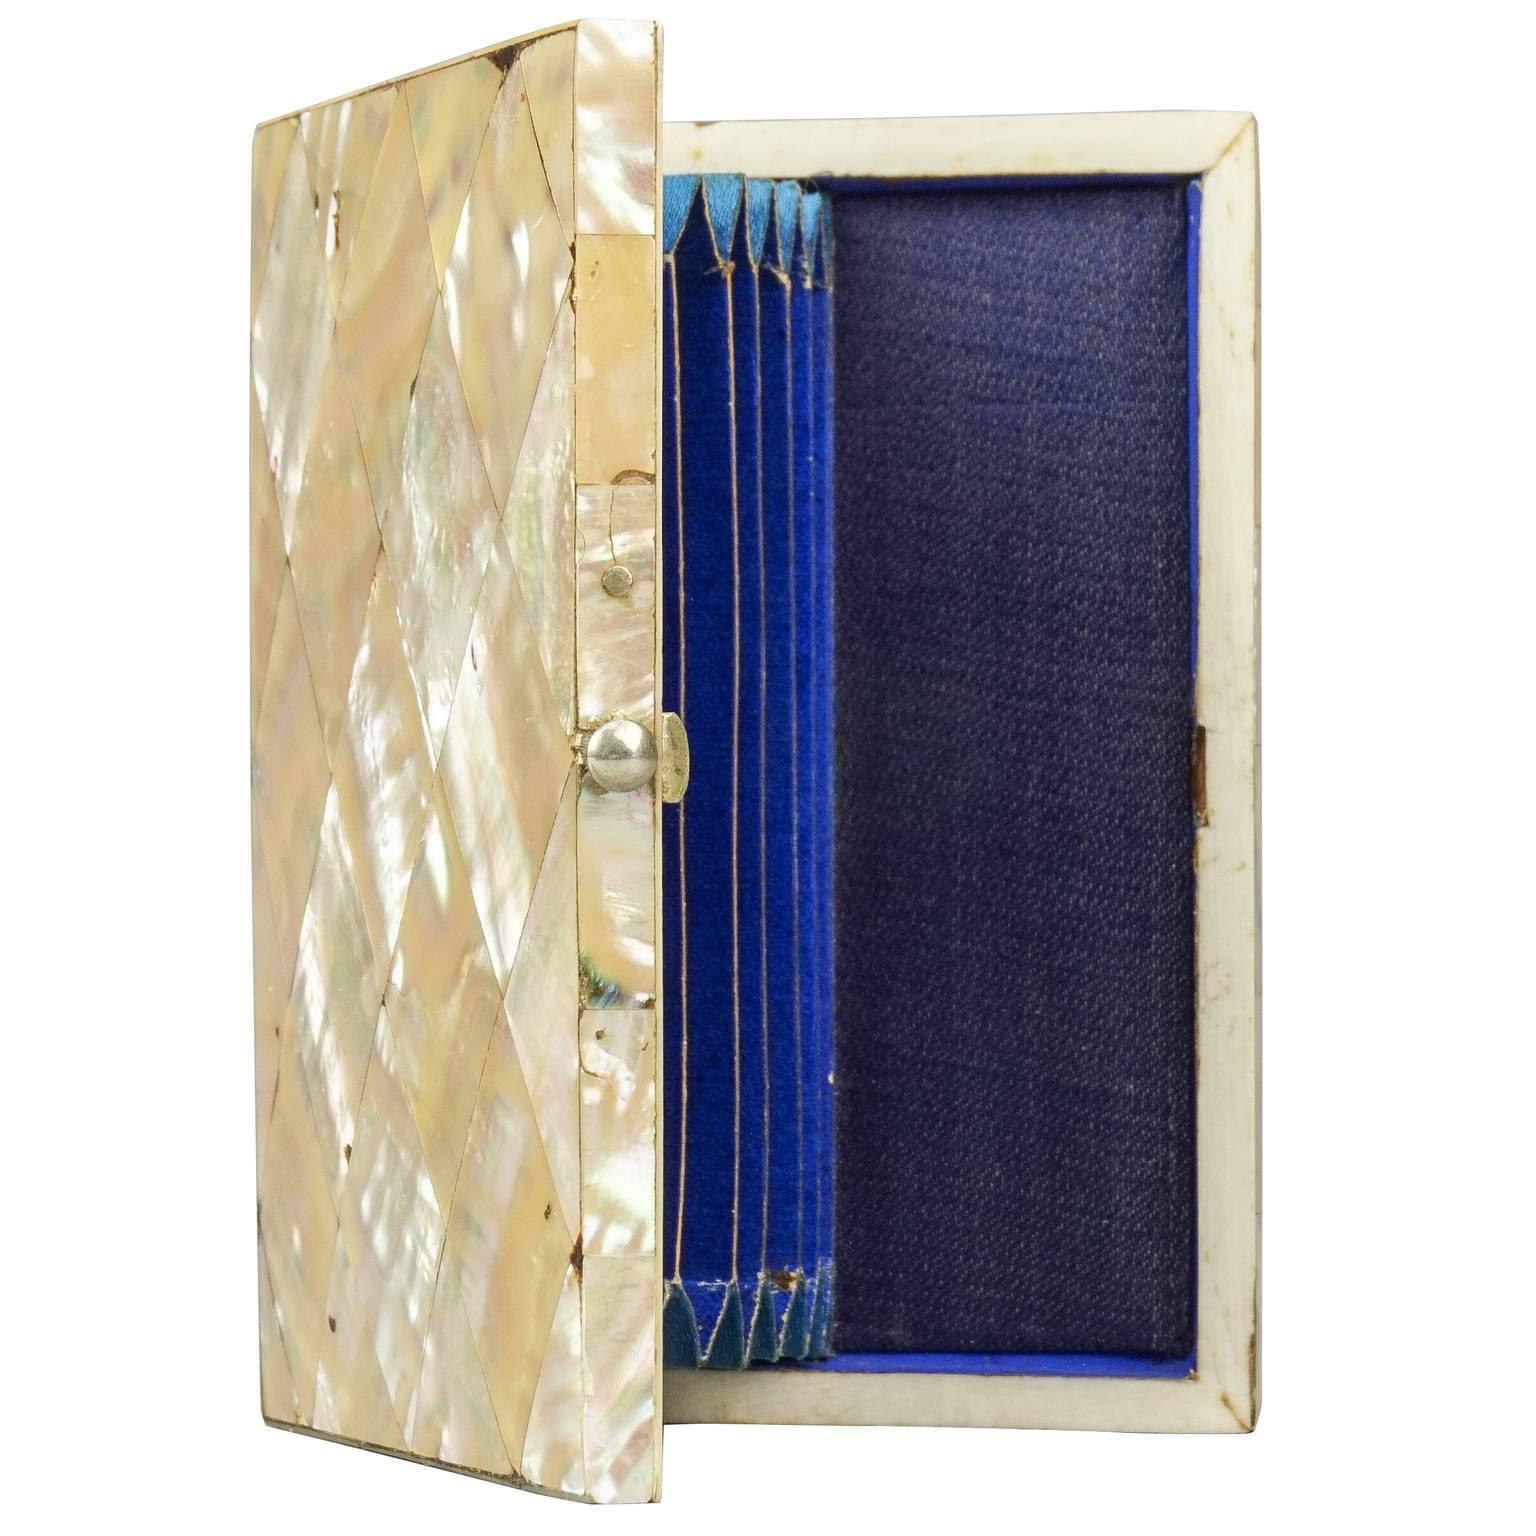 Couldn't resist this elegant English Victorian card case.
This business or calling card holder is quite large with a blue accordion interior that will hold modern credit cards, business cards, a drivers license, and your house key. 

The case is